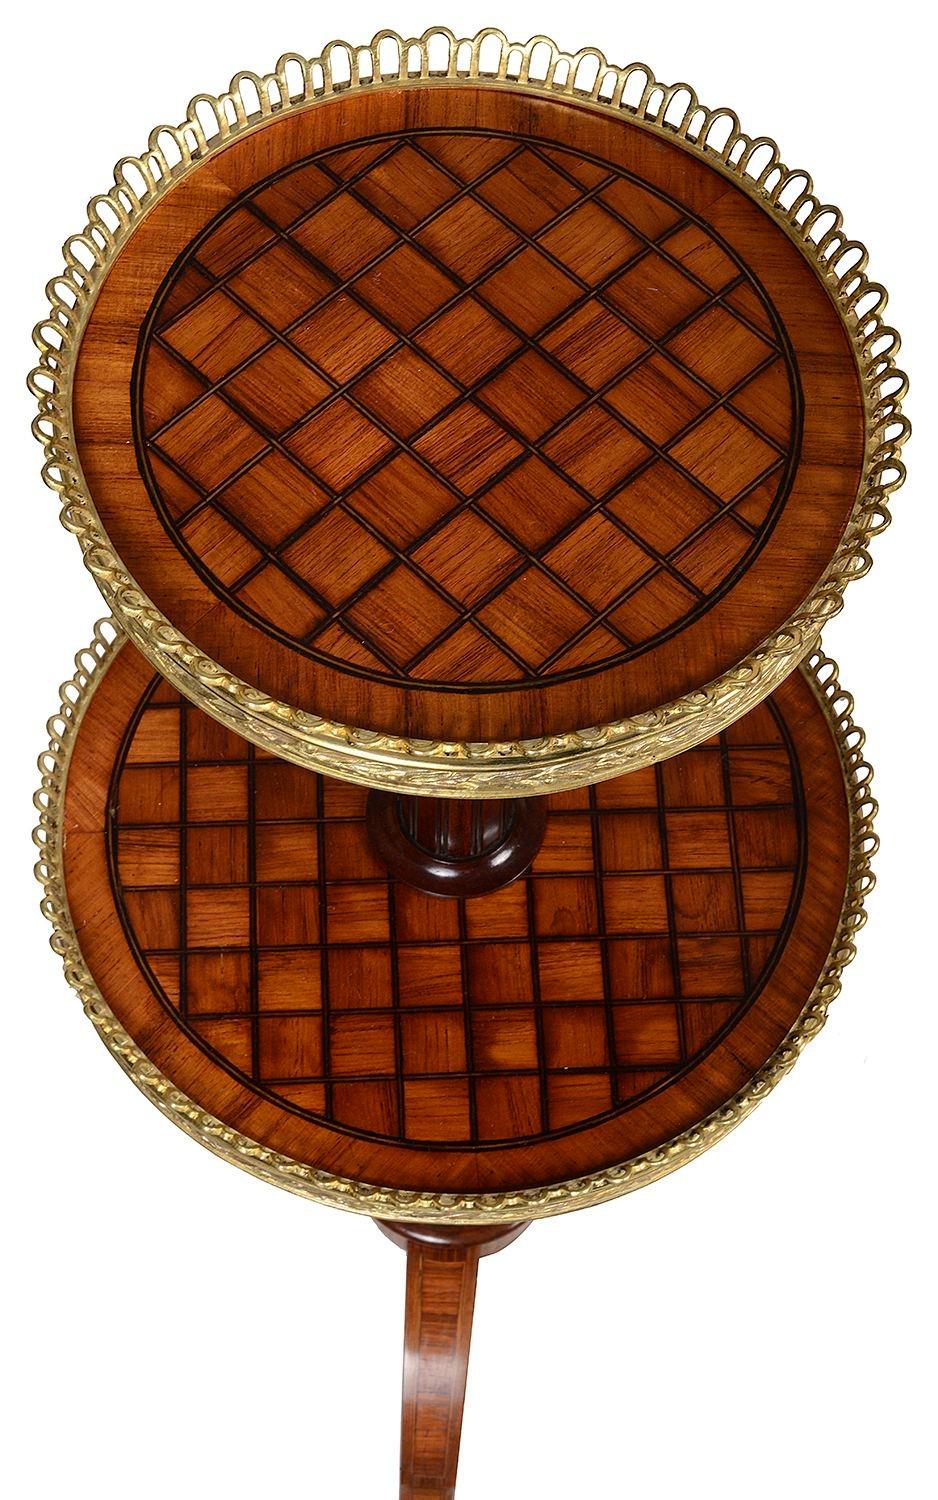 A very good quality matched pair of marquetry inlaid circular two-tier stands with distinctive trellis inlay attributed to Donald Ross with finely cast gilt metal mounts, circa 1860
Donald Ross was a celebrated late 19th Century furniture maker.